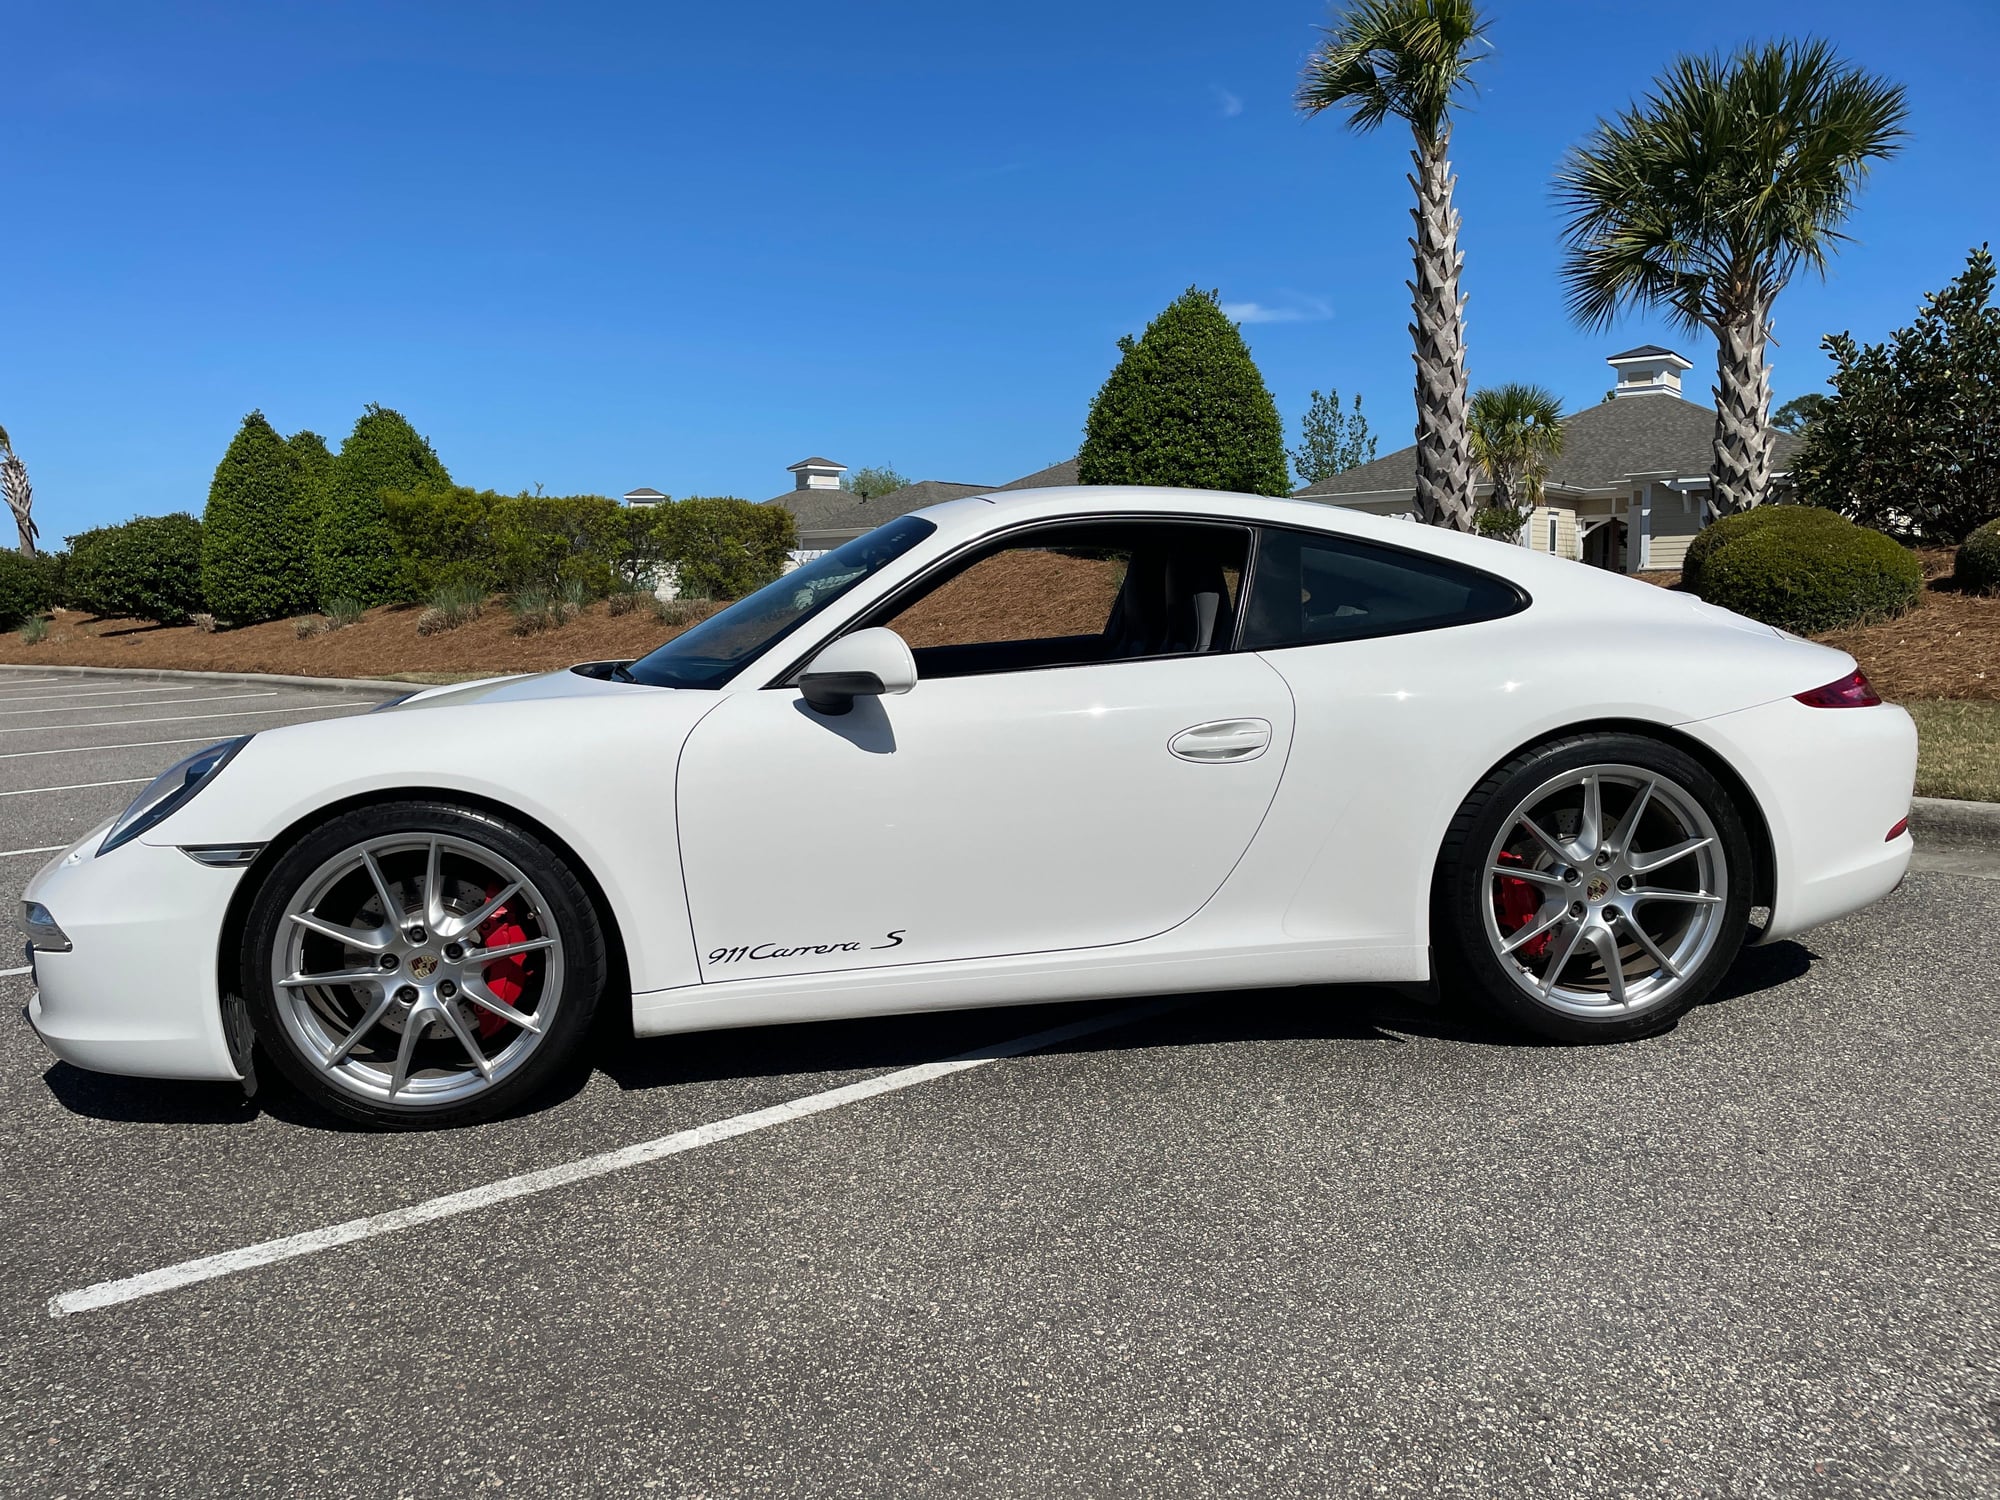 2012 Porsche 911 - 2012.5 991S, PDK, Adaptive Sport Seats, Carrara White Coupe- NC - Used - VIN WP0AB2A91CS122303 - 41,450 Miles - 6 cyl - 2WD - Automatic - Coupe - White - Wilmington, NC 28451, United States